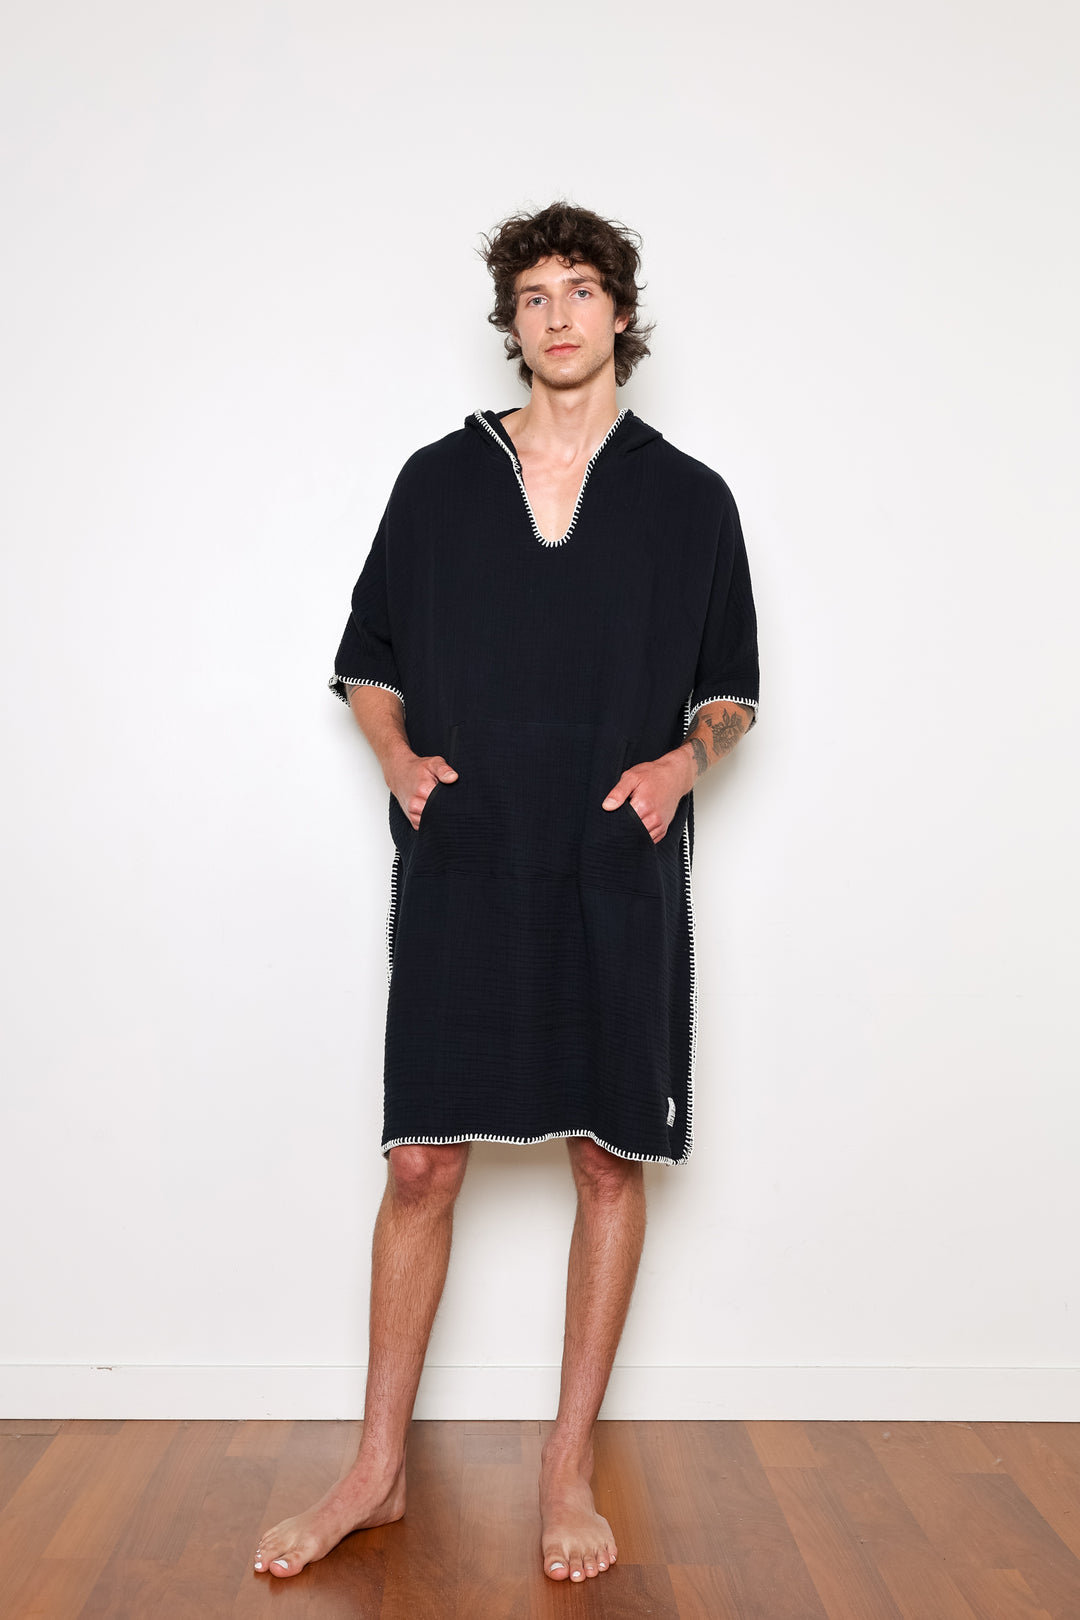 The Men's Cocoon Surf Poncho